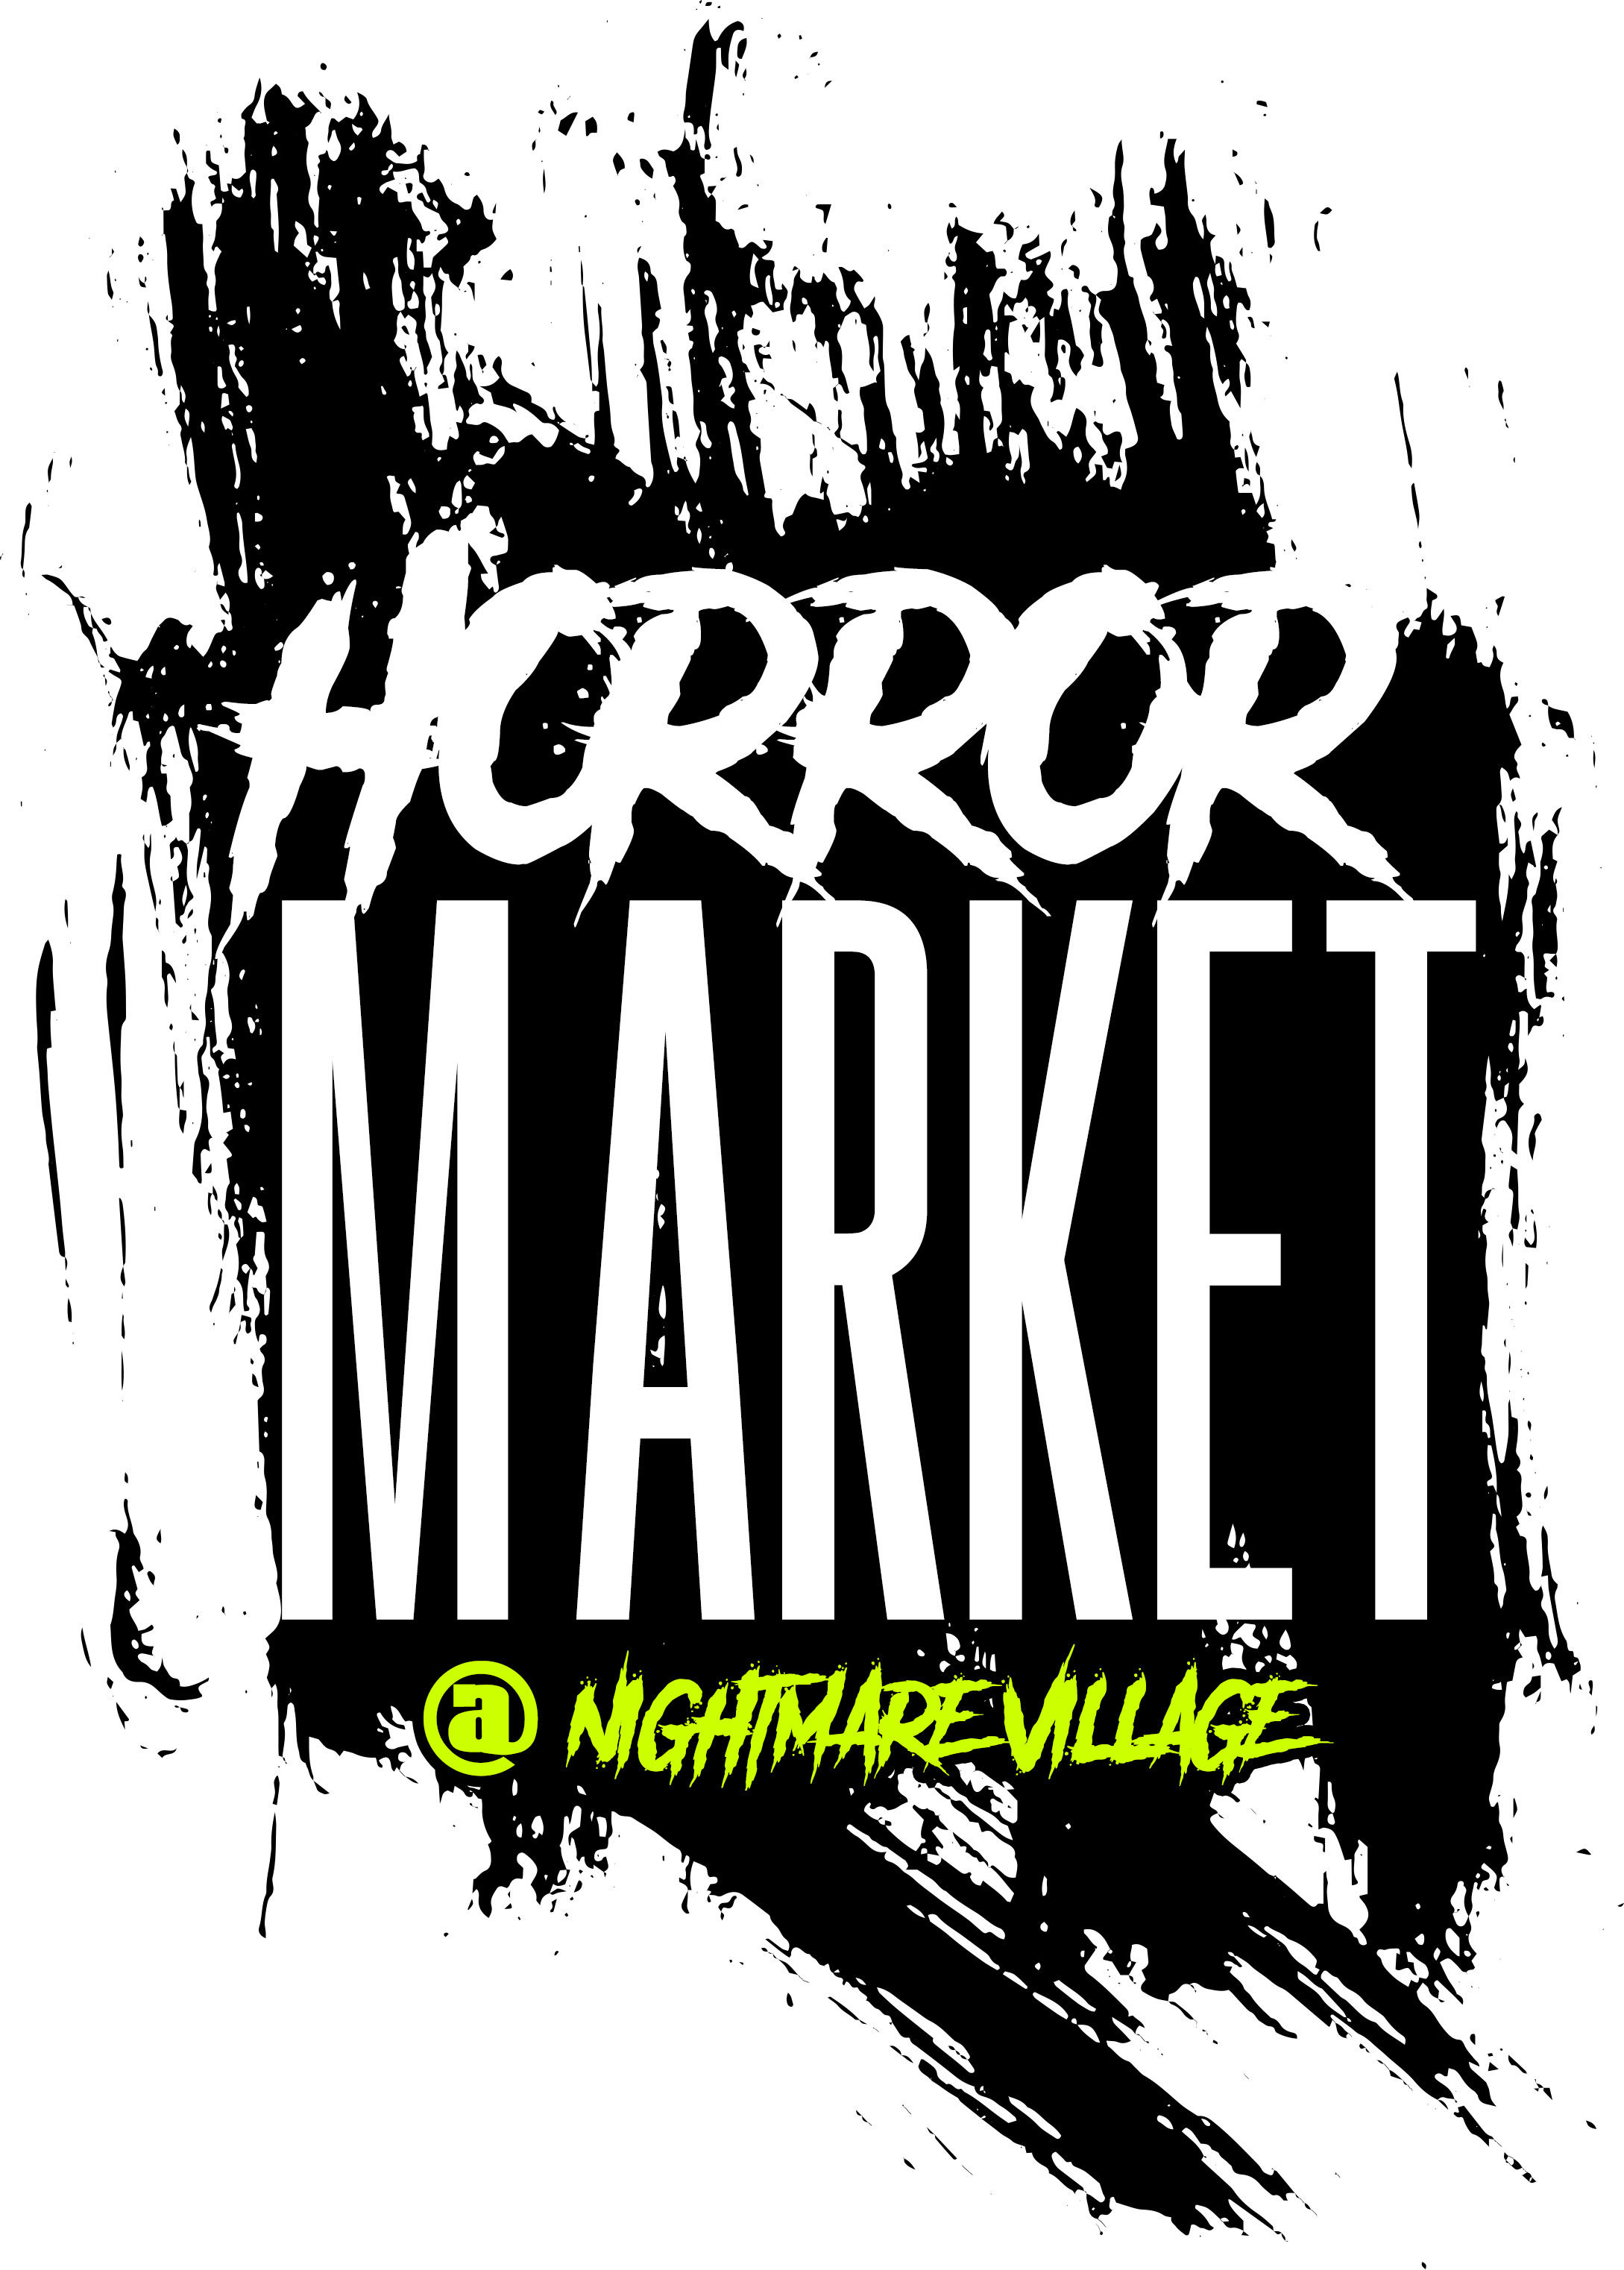 The Horror Market at Nightmare Village available in October